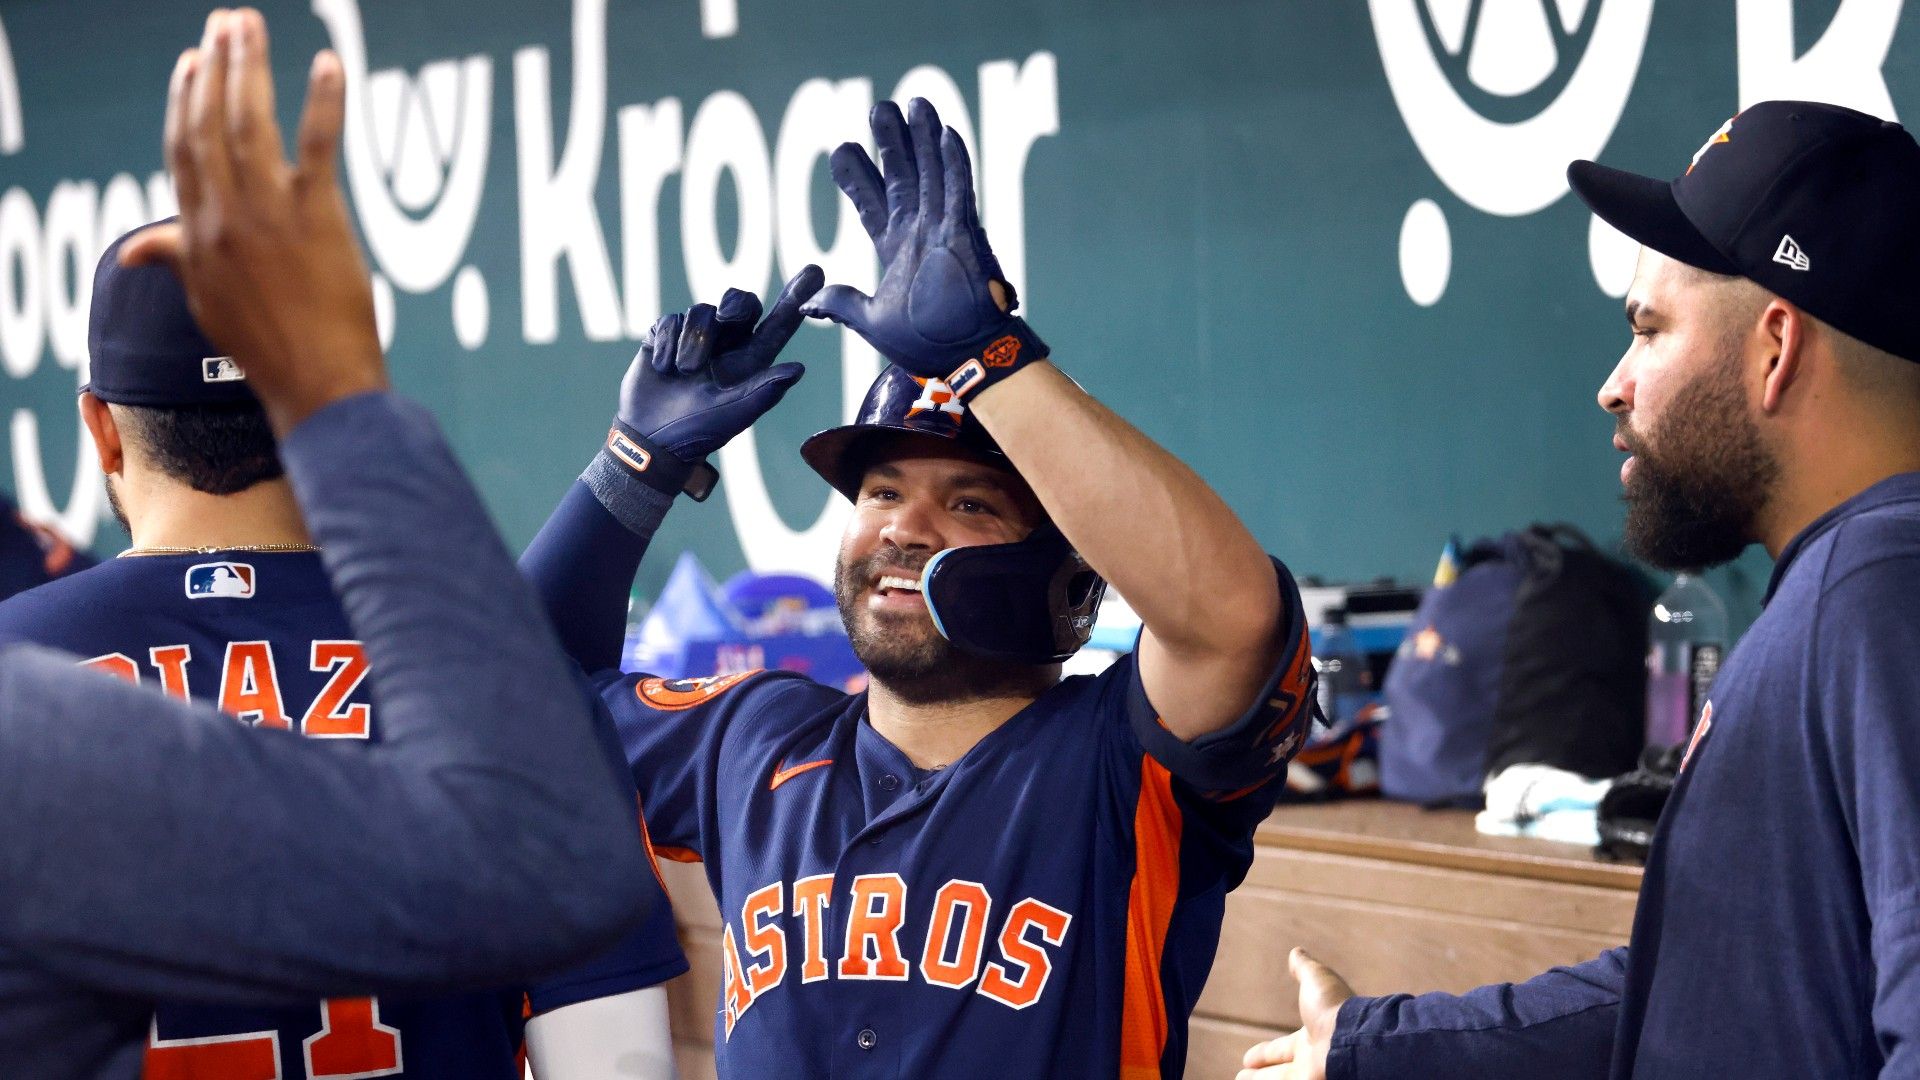 Altuve's 3 HRs propel Astros to dominate Rangers, securing division lead